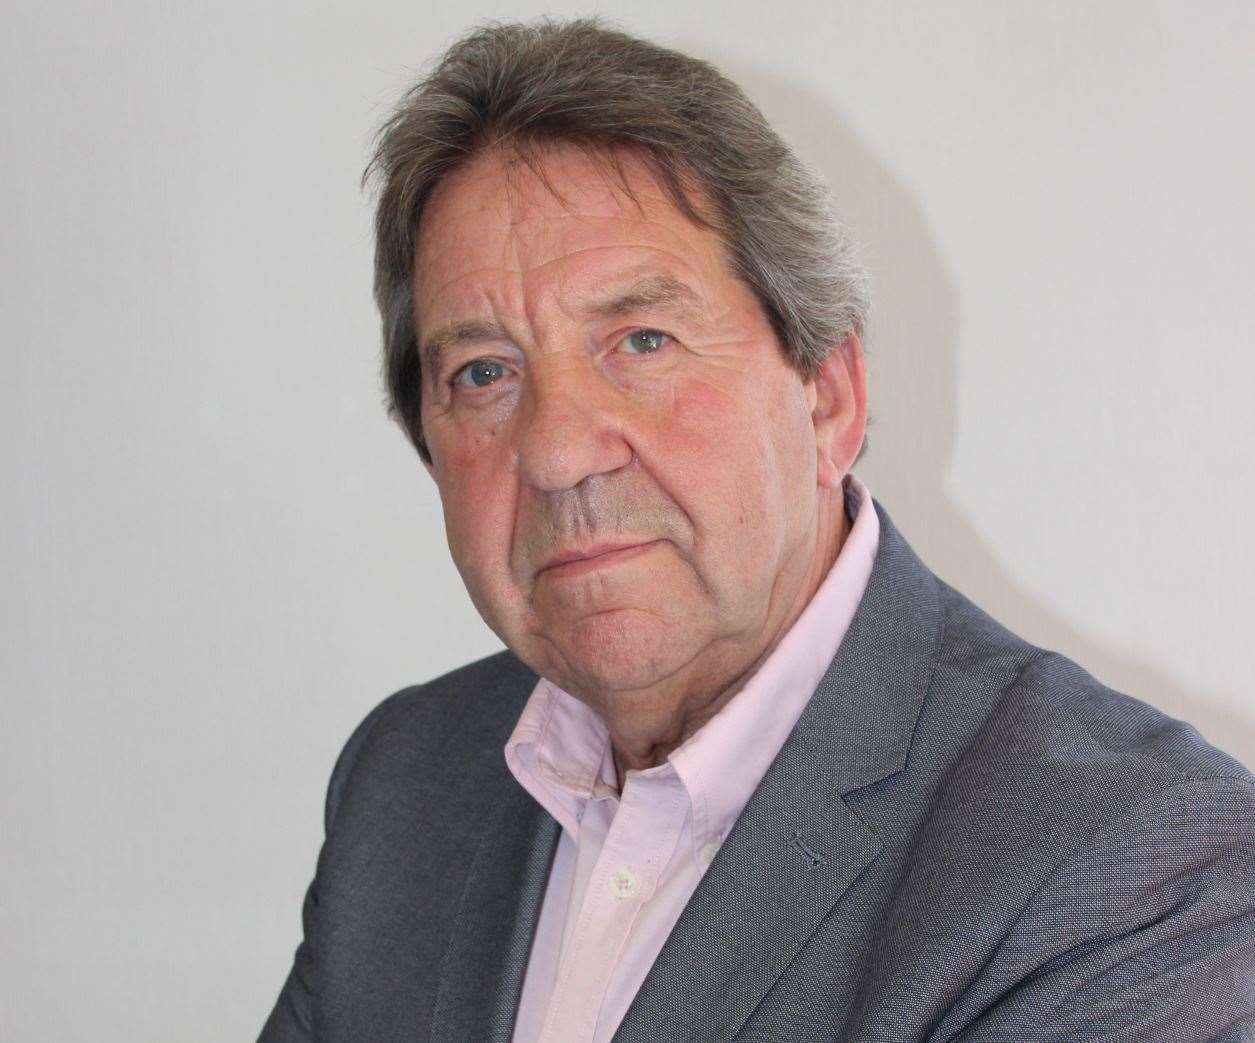 Sittingbourne and Sheppey MP, Gordon Henderson says he's heard of other cases